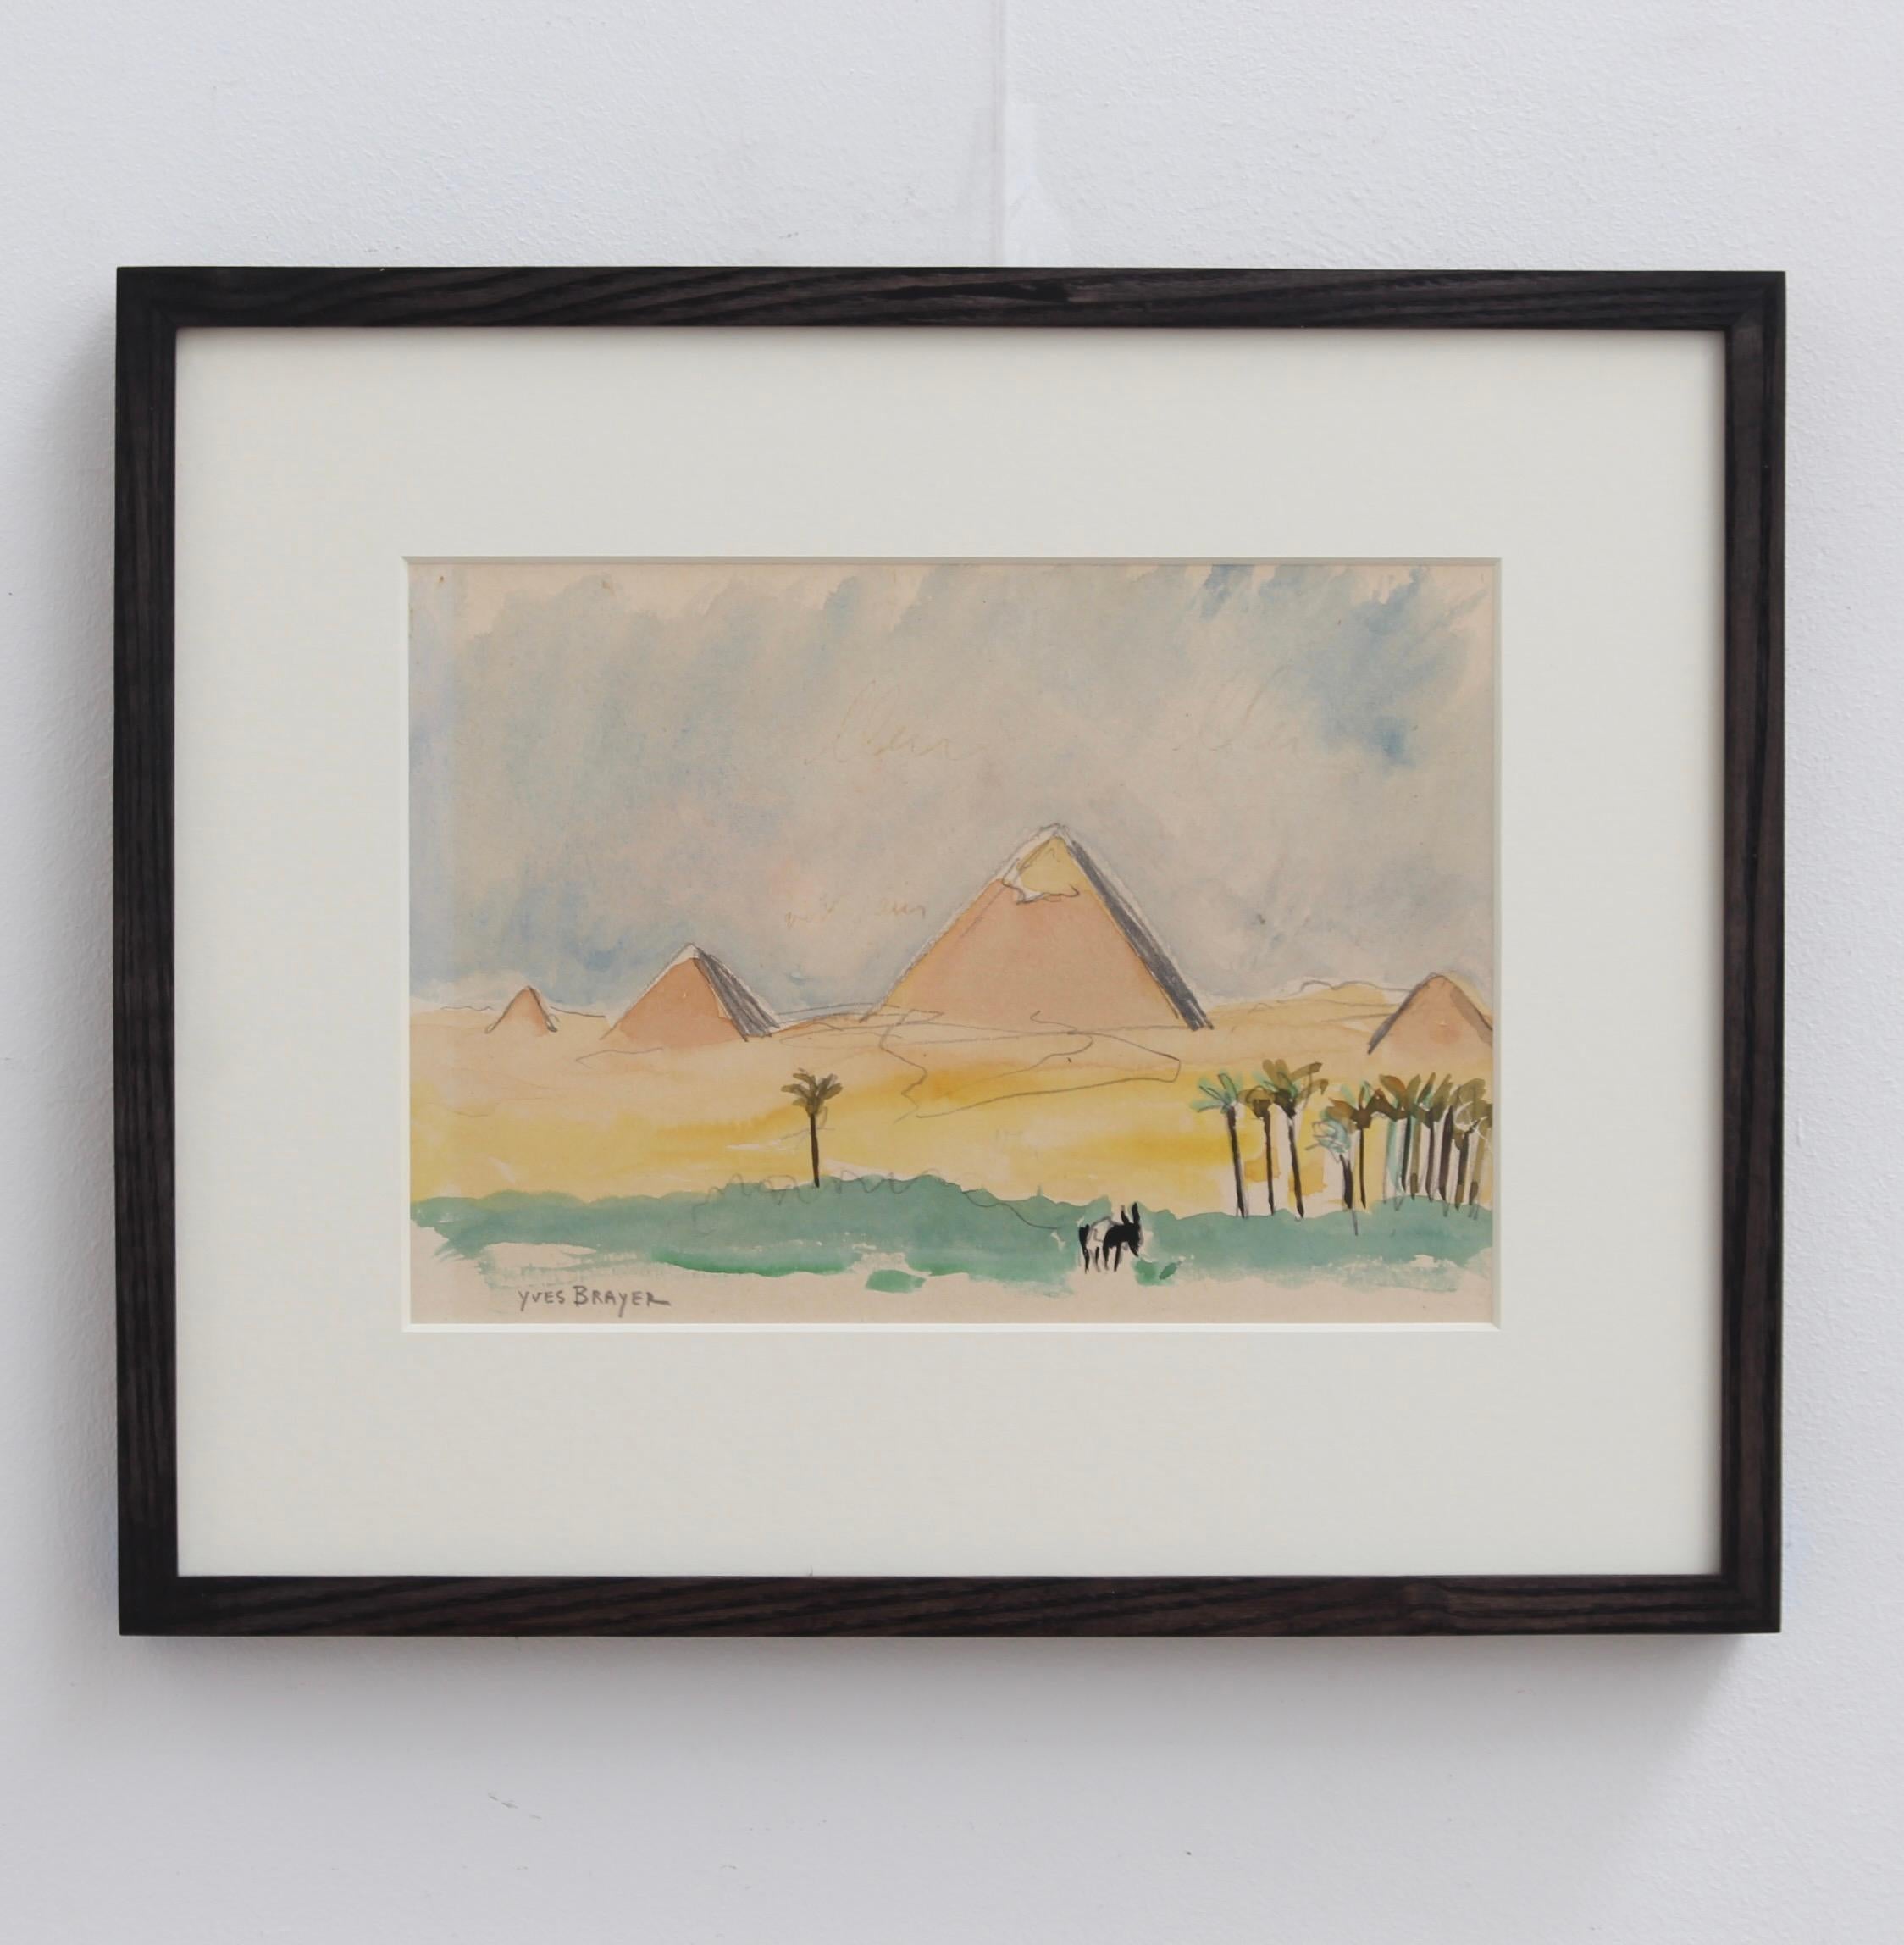 The Pyramids of Giza - Art by Yves Brayer